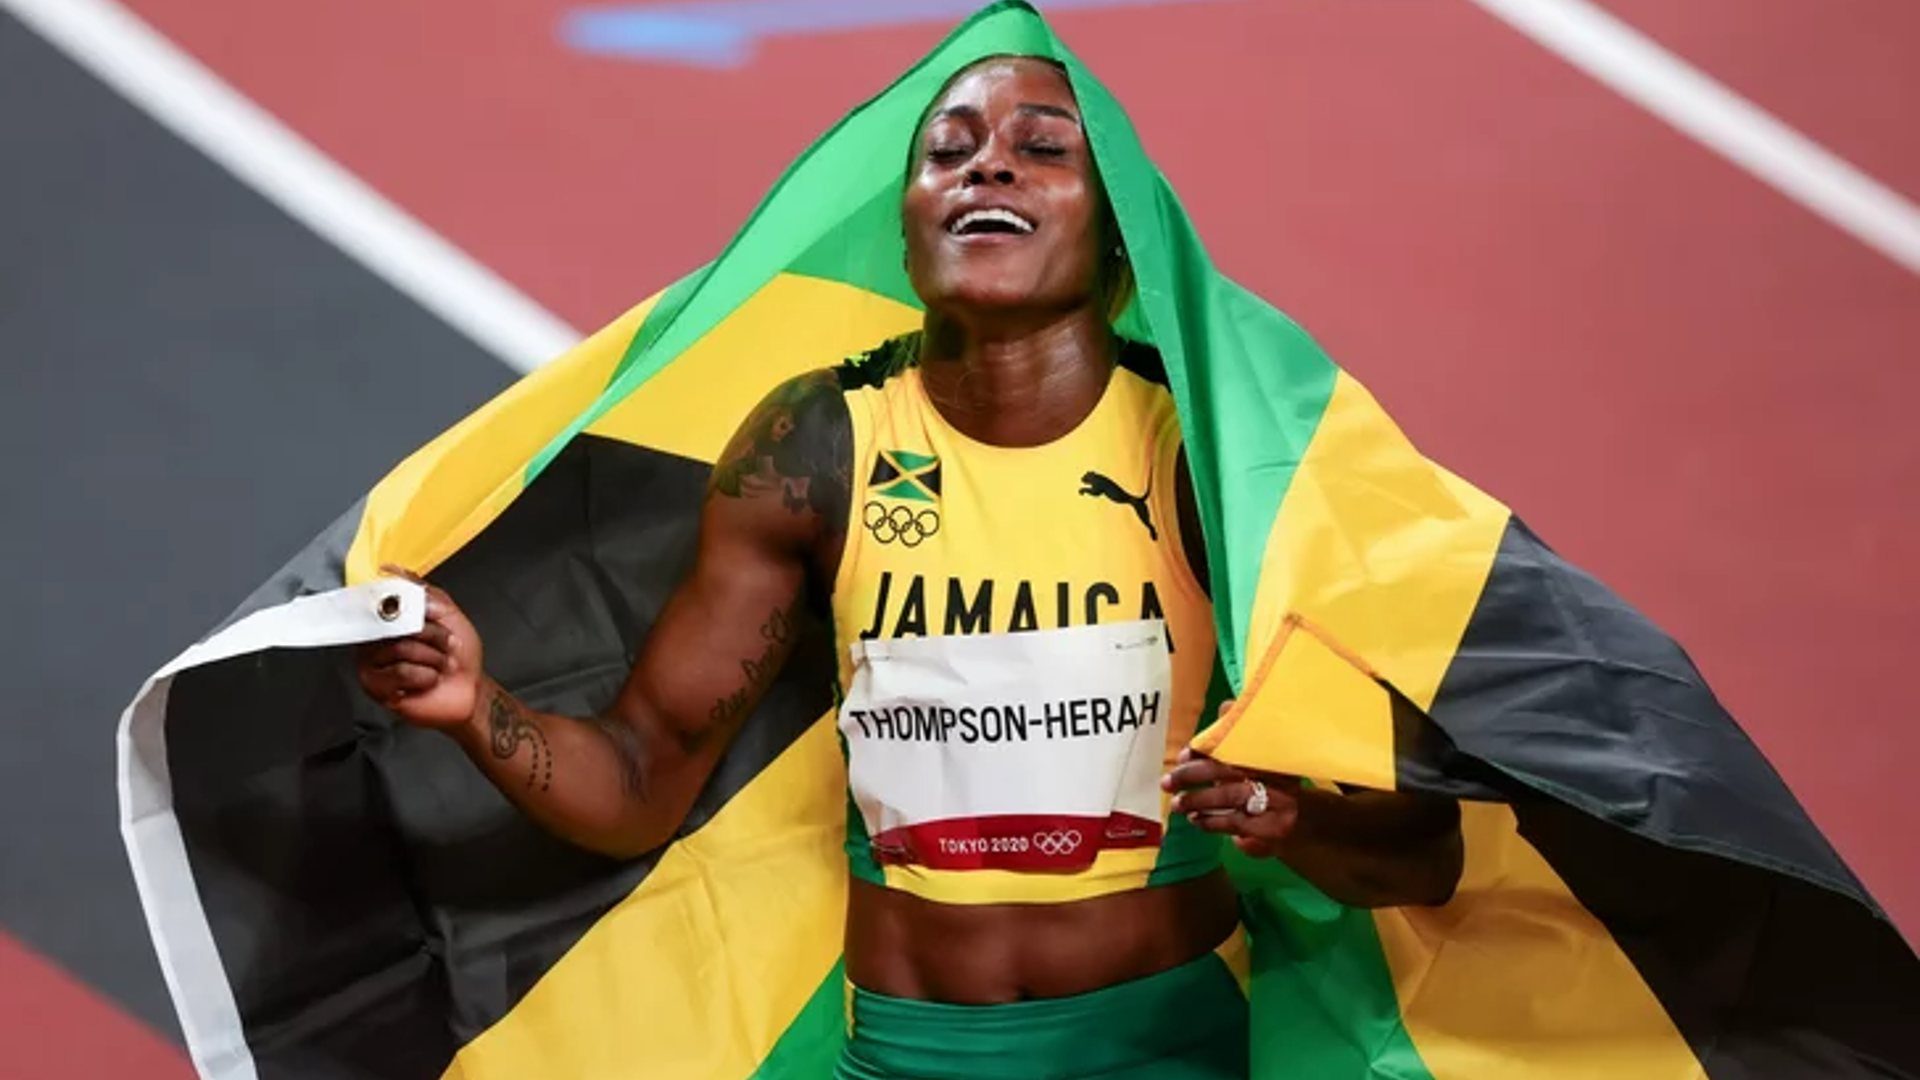 Elaine Thompson-Herah celebrating after her win (Credits- Twitter)